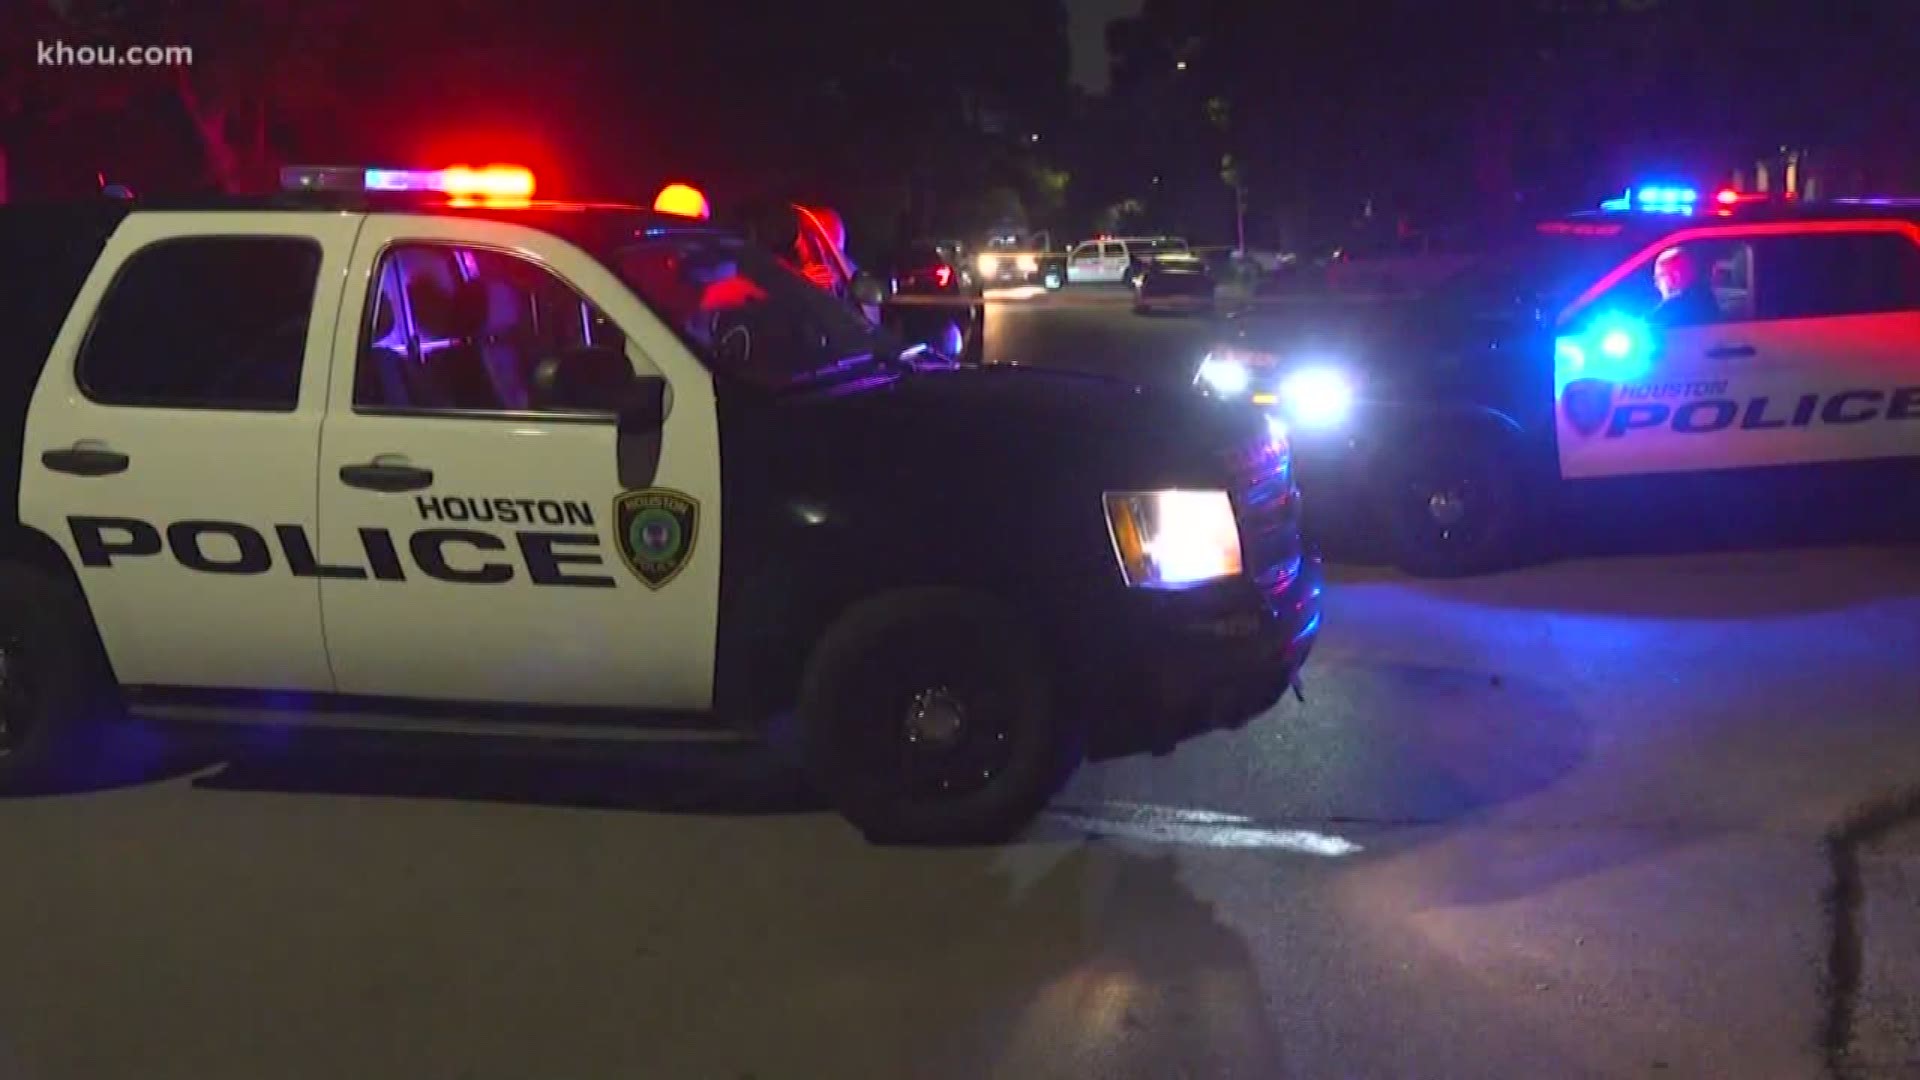 Two men were found shot to death on a front porch in southwest Houston overnight.